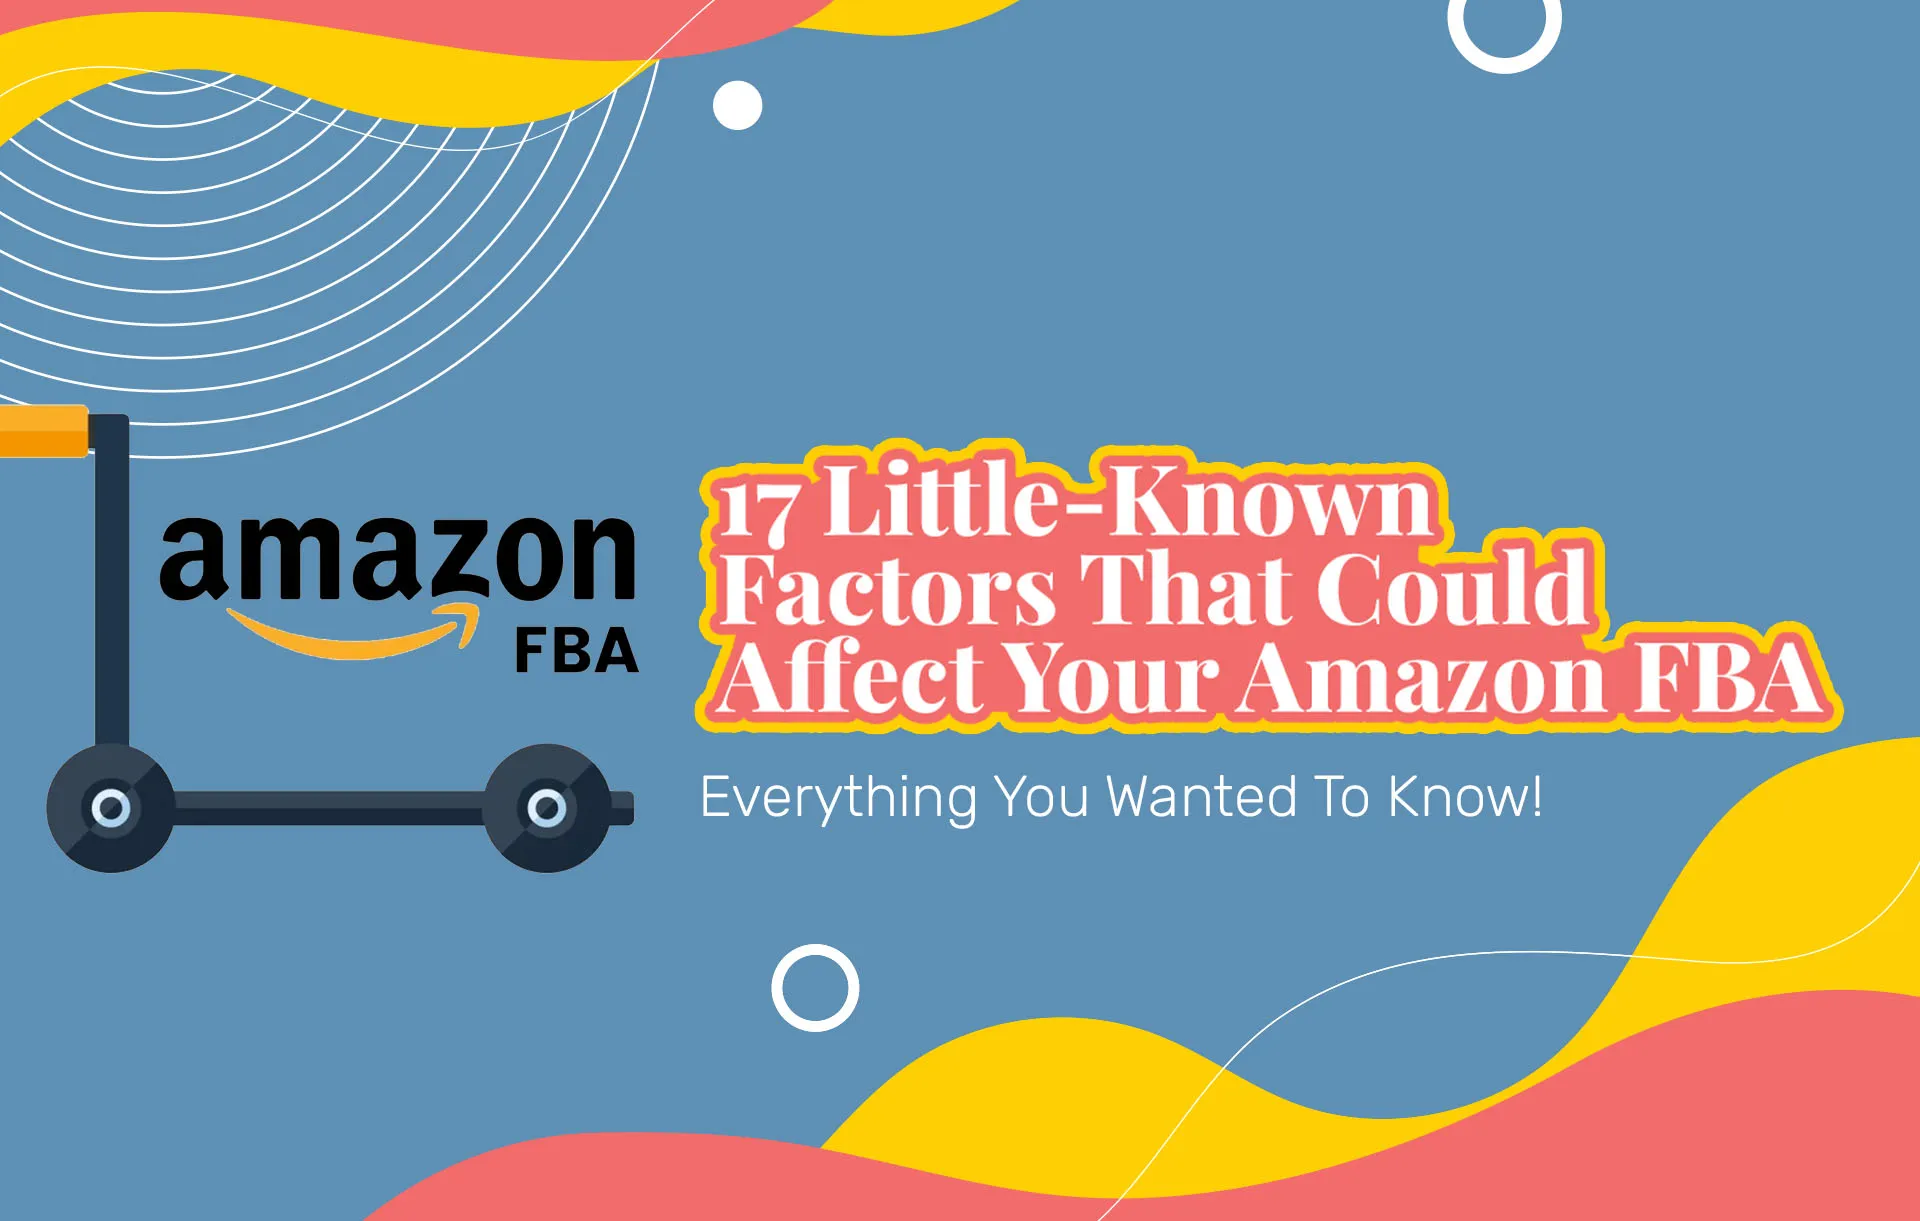 Factors That Could Affect Your Amazon FBA Store